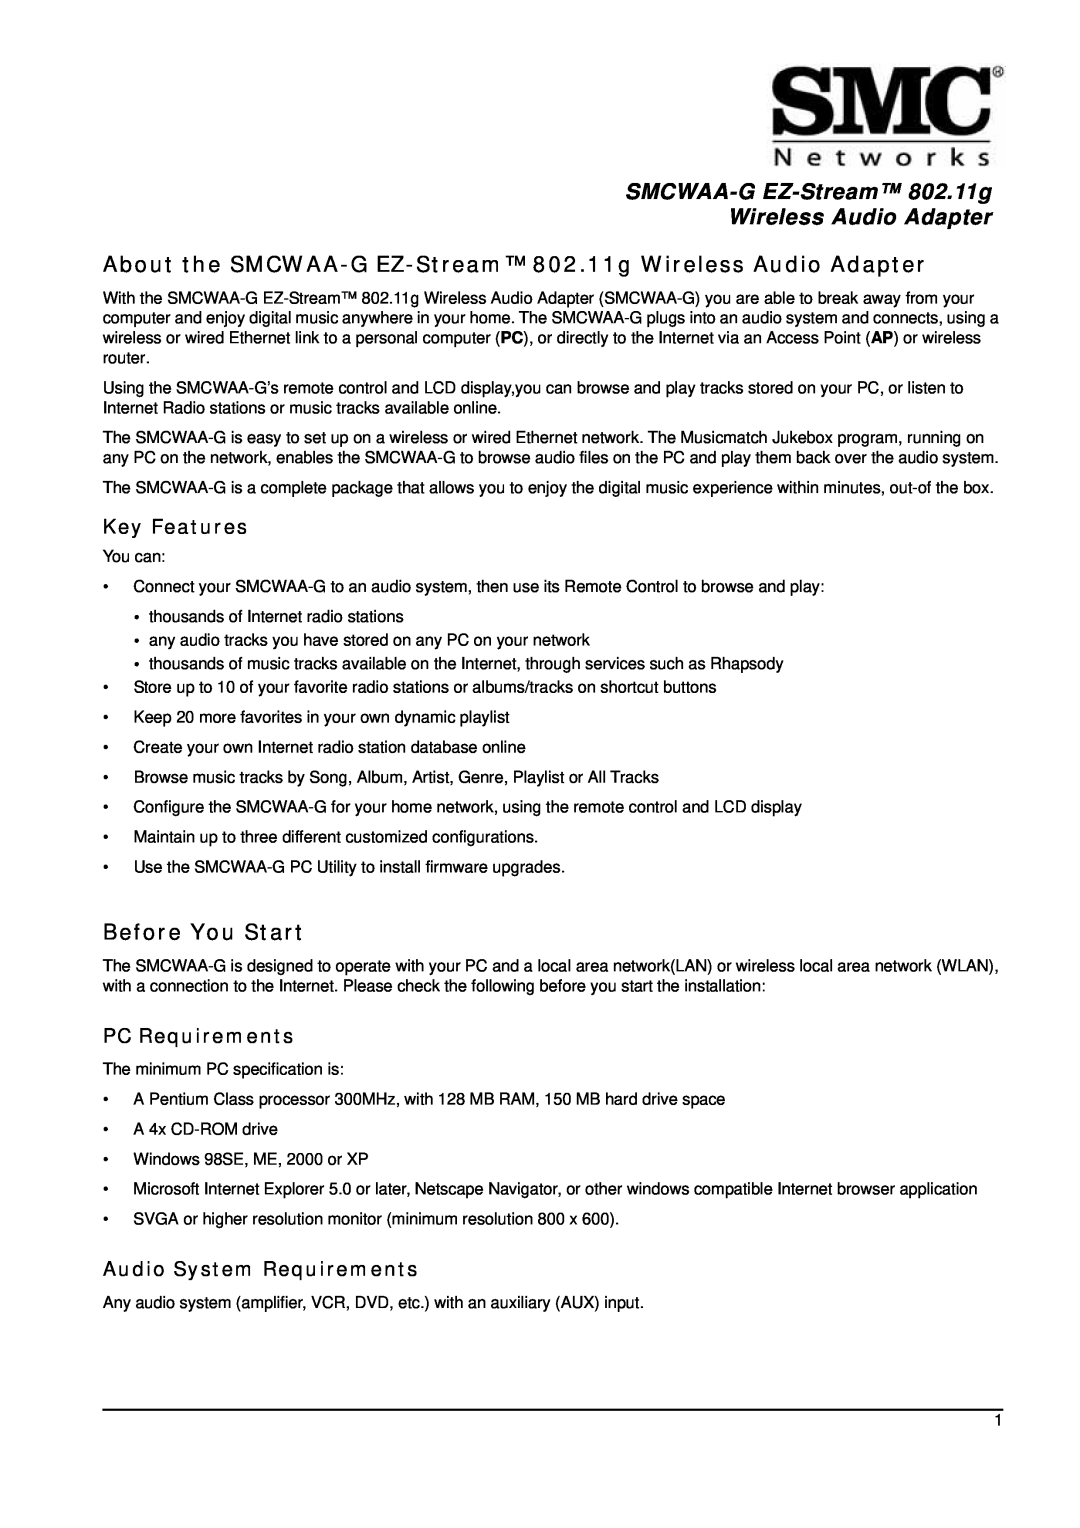 SMC Networks manual About the SMCWAA-G EZ-Stream 802.11g Wireless Audio Adapter, Before You Start, Key Features 